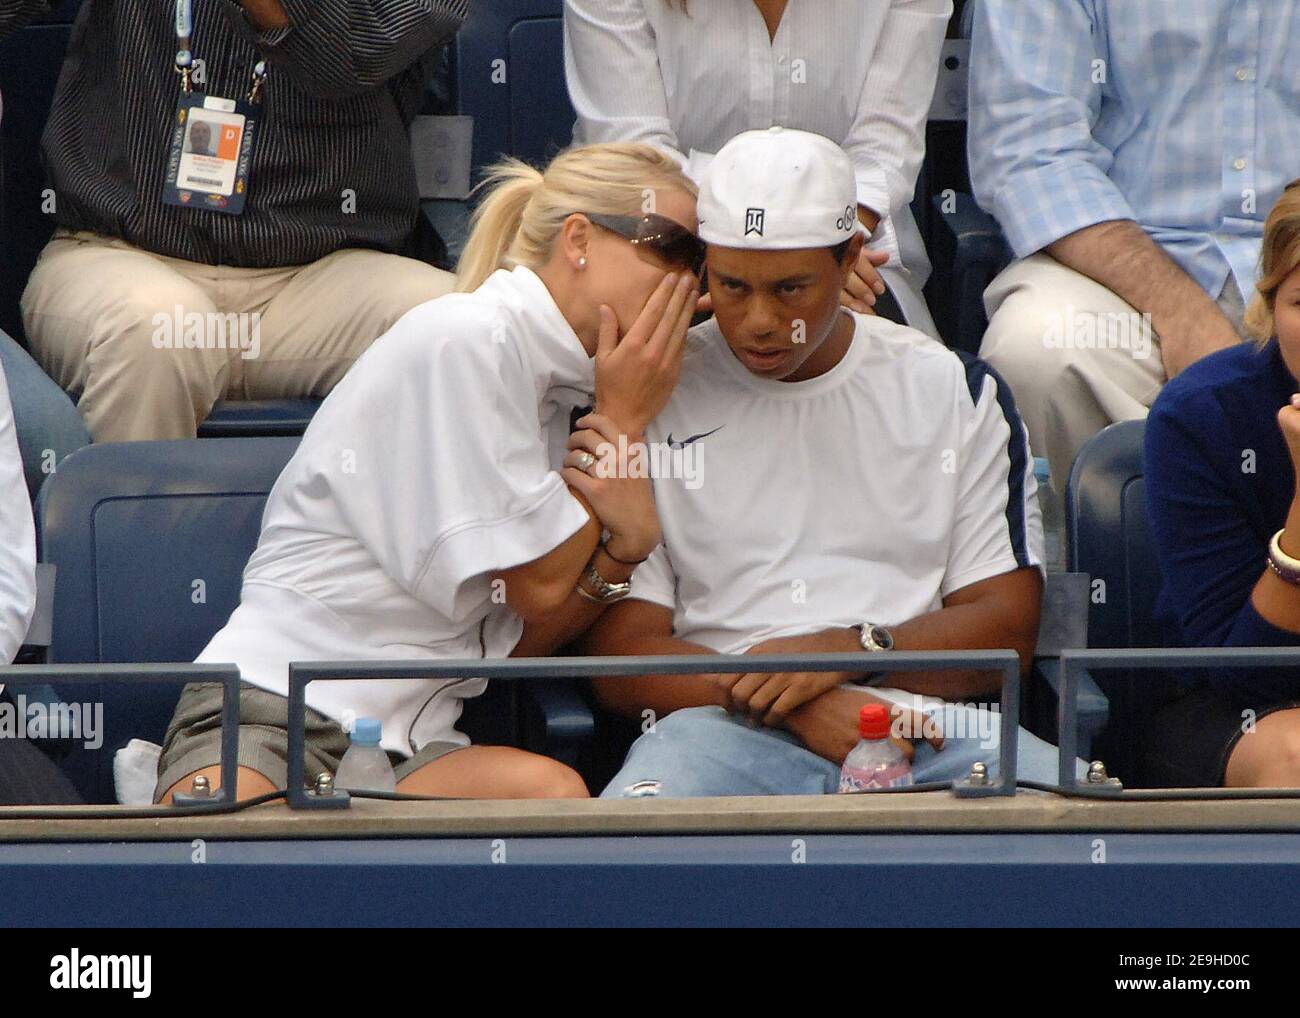 Tiger Woods and his wife Elin Nordegren watch Switzerland's Roger Federer defeating USA's Andy Roddick, 6-2, 4-6, 7-5, 6-1, in the Men's final of the 2006 US Open at the USTA Billie Jean King National Tennis Center in Flushing Meadows, in New York City, NY, USA, on September 10, 2006. Photo by Lionel Hahn/Cameleon/ABACAPRESS.COM Stock Photo